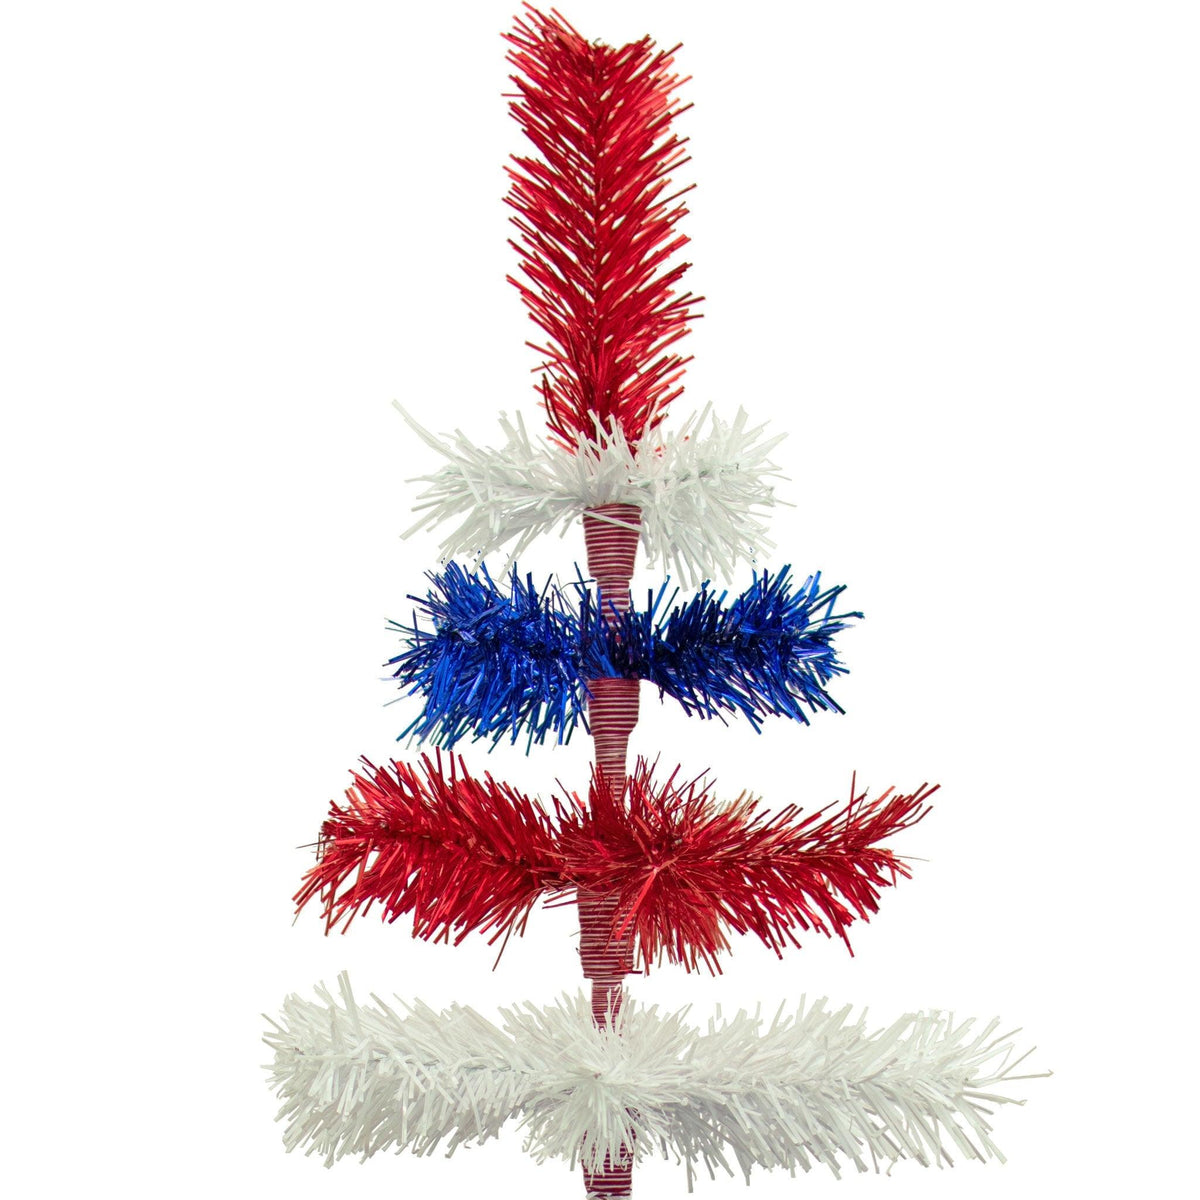 36in tall Red, White, and Blue Layered Tinsel Christmas Trees made by hand in the USA.  Decorate for the holidays with retro 4th of July-themed Trees and start creating your centerpiece now.  Shop for more at leedisplay.com